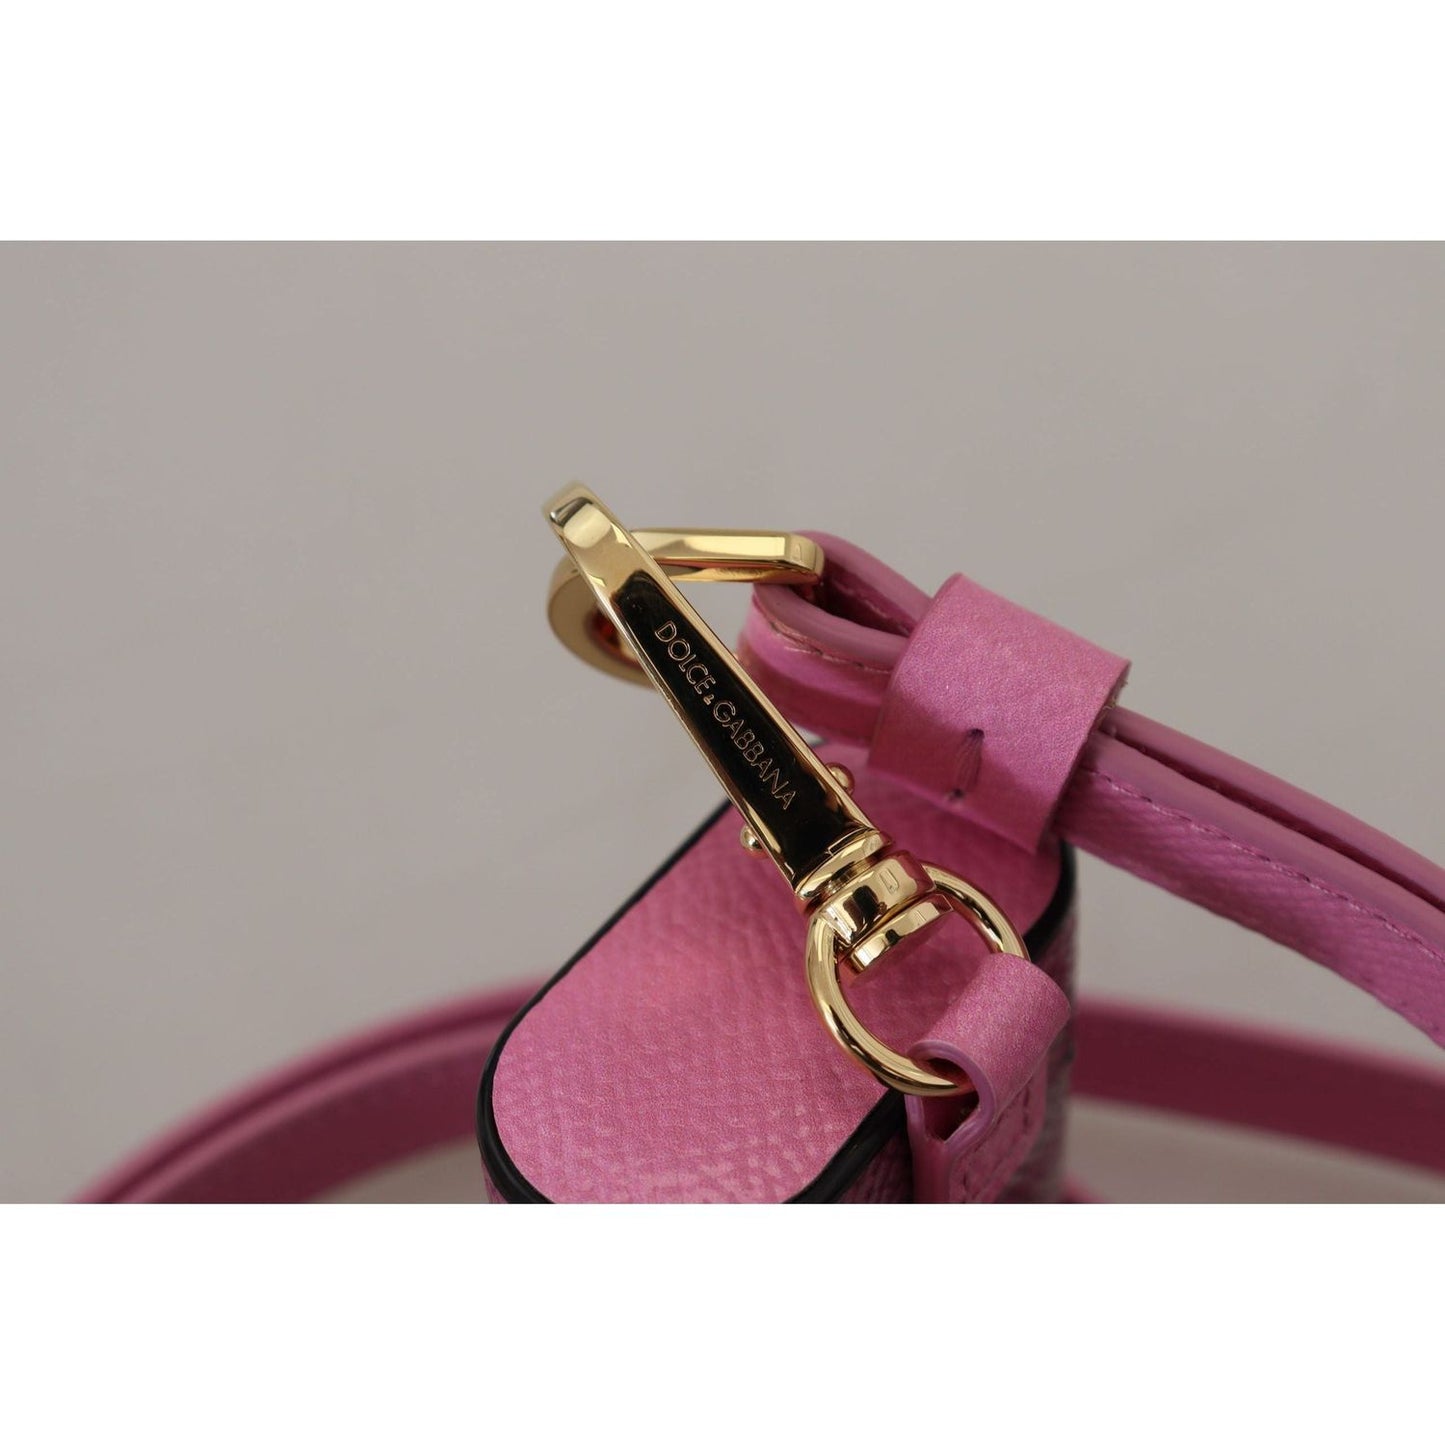 Dolce & Gabbana Chic Leather AirPods Case in Pink pink-black-leather-strap-gold-metal-logo-airpods-case